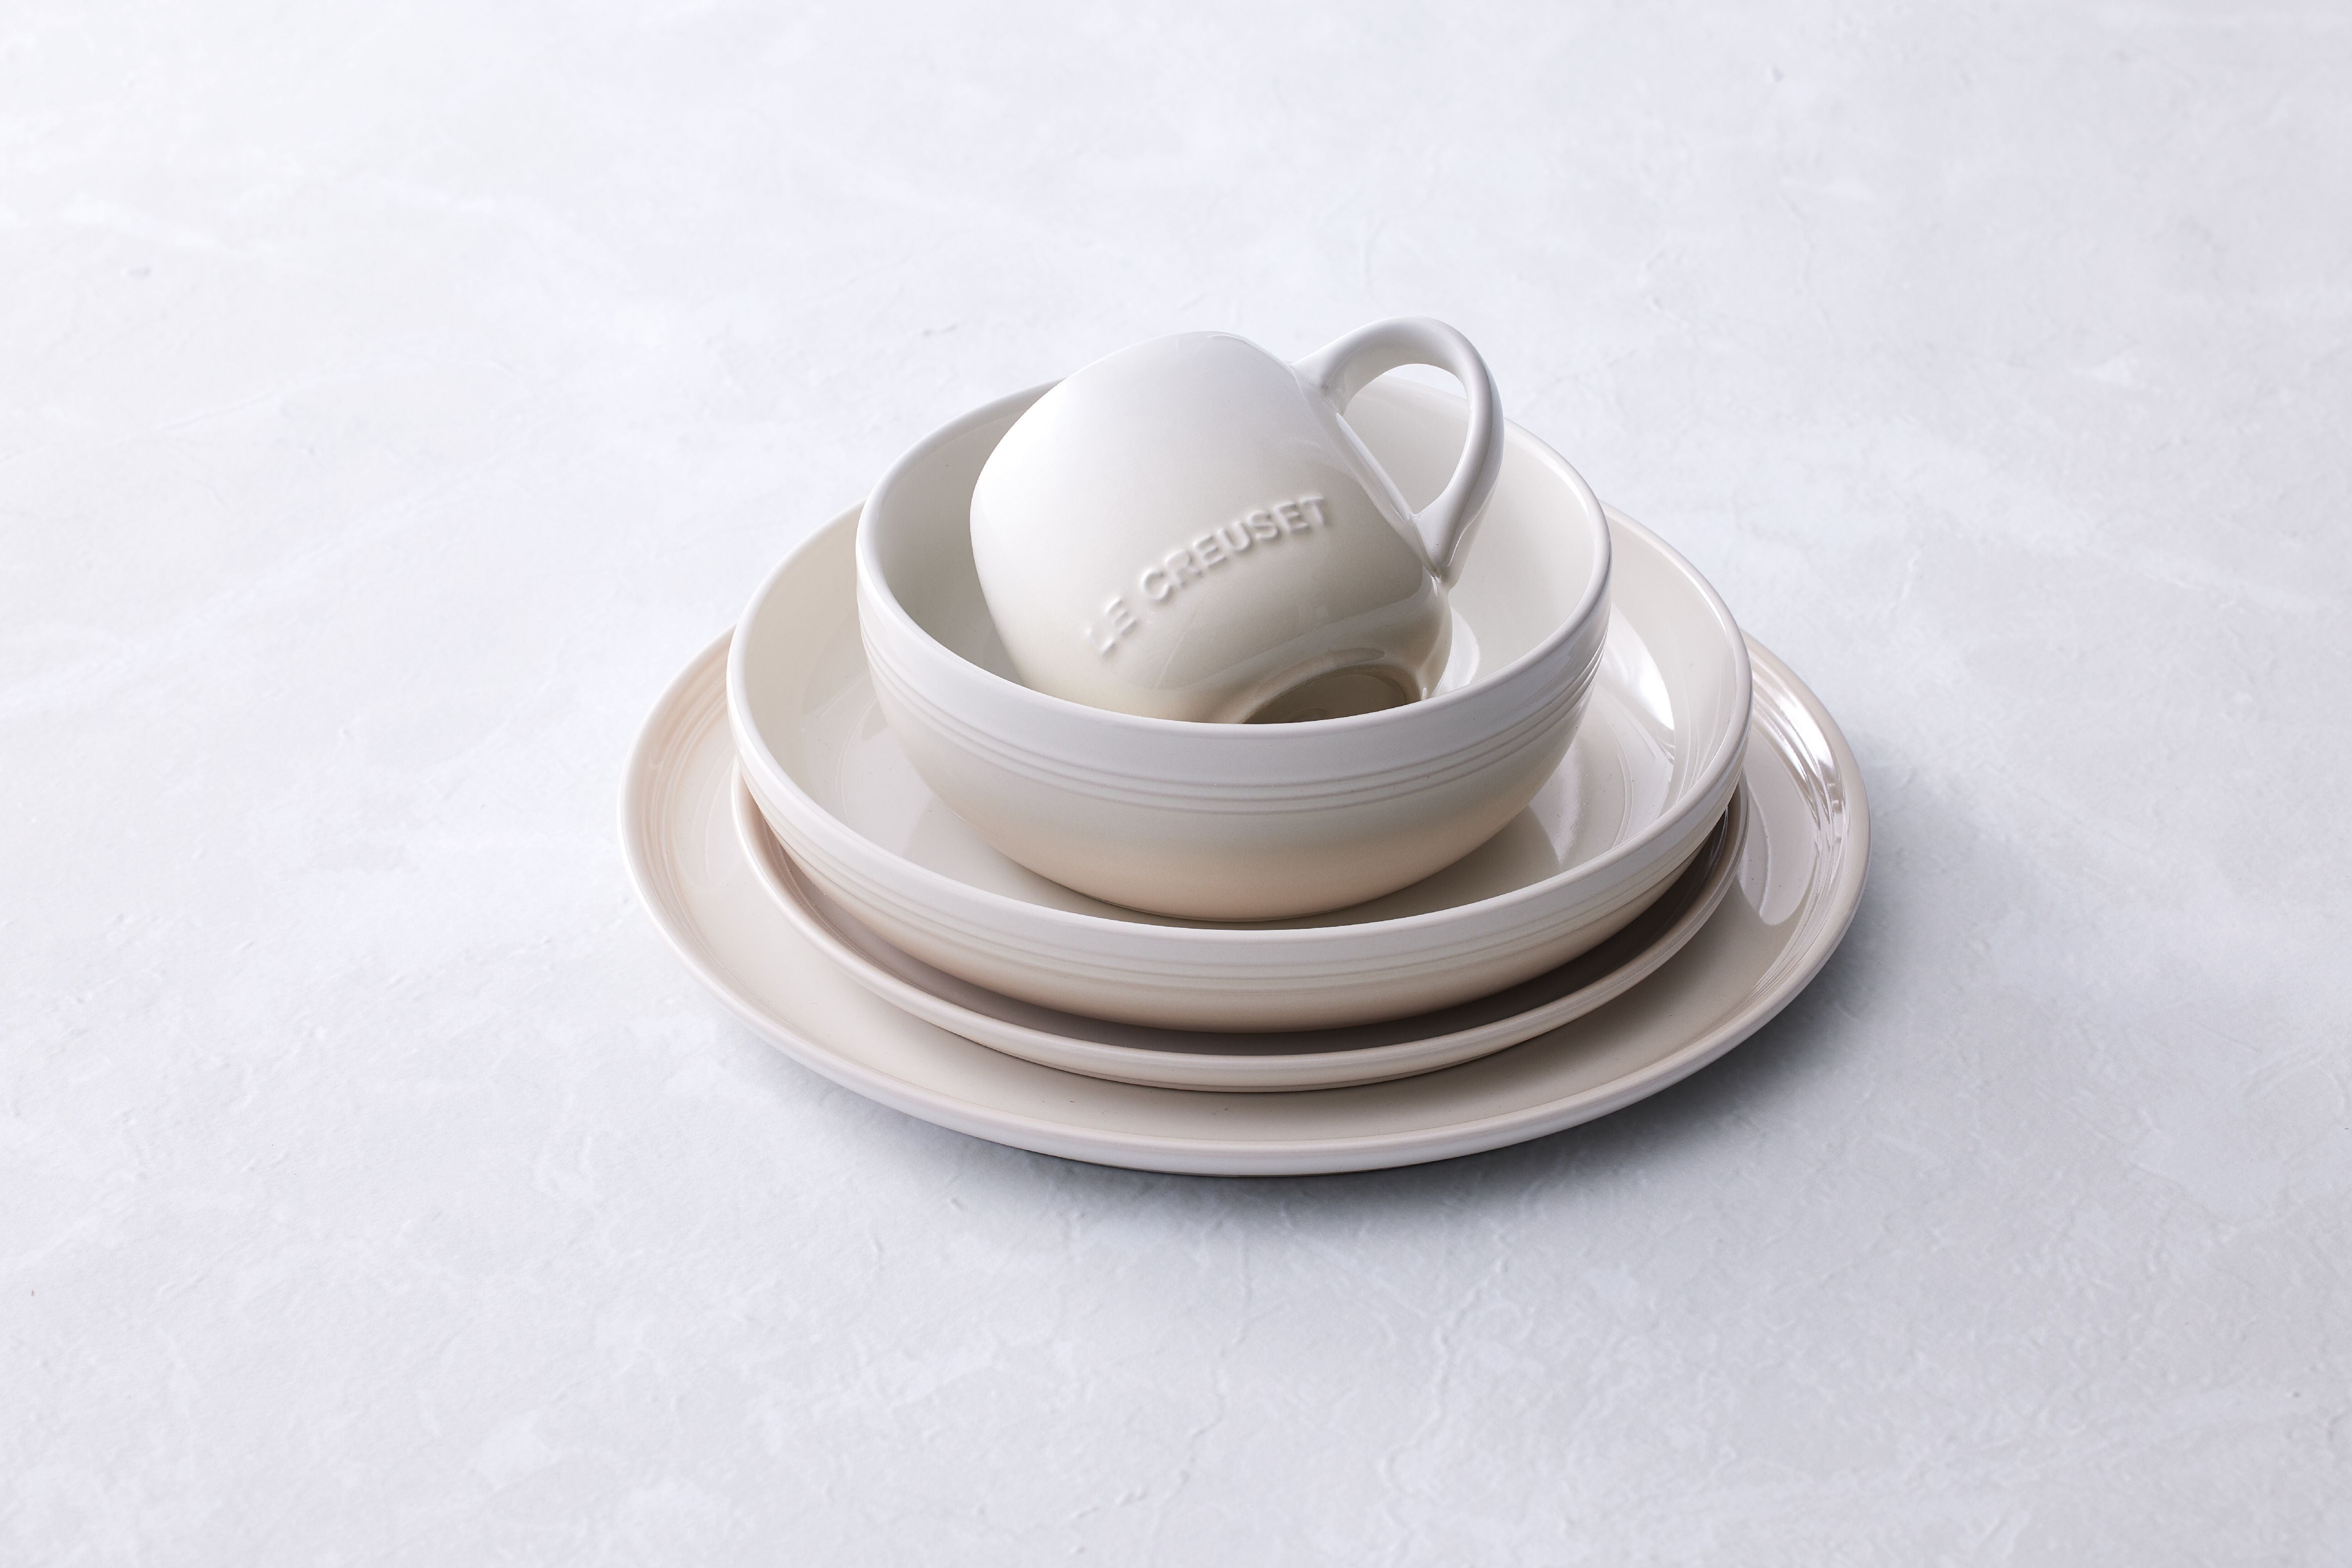 Le creuset coupe sideplade, marengs